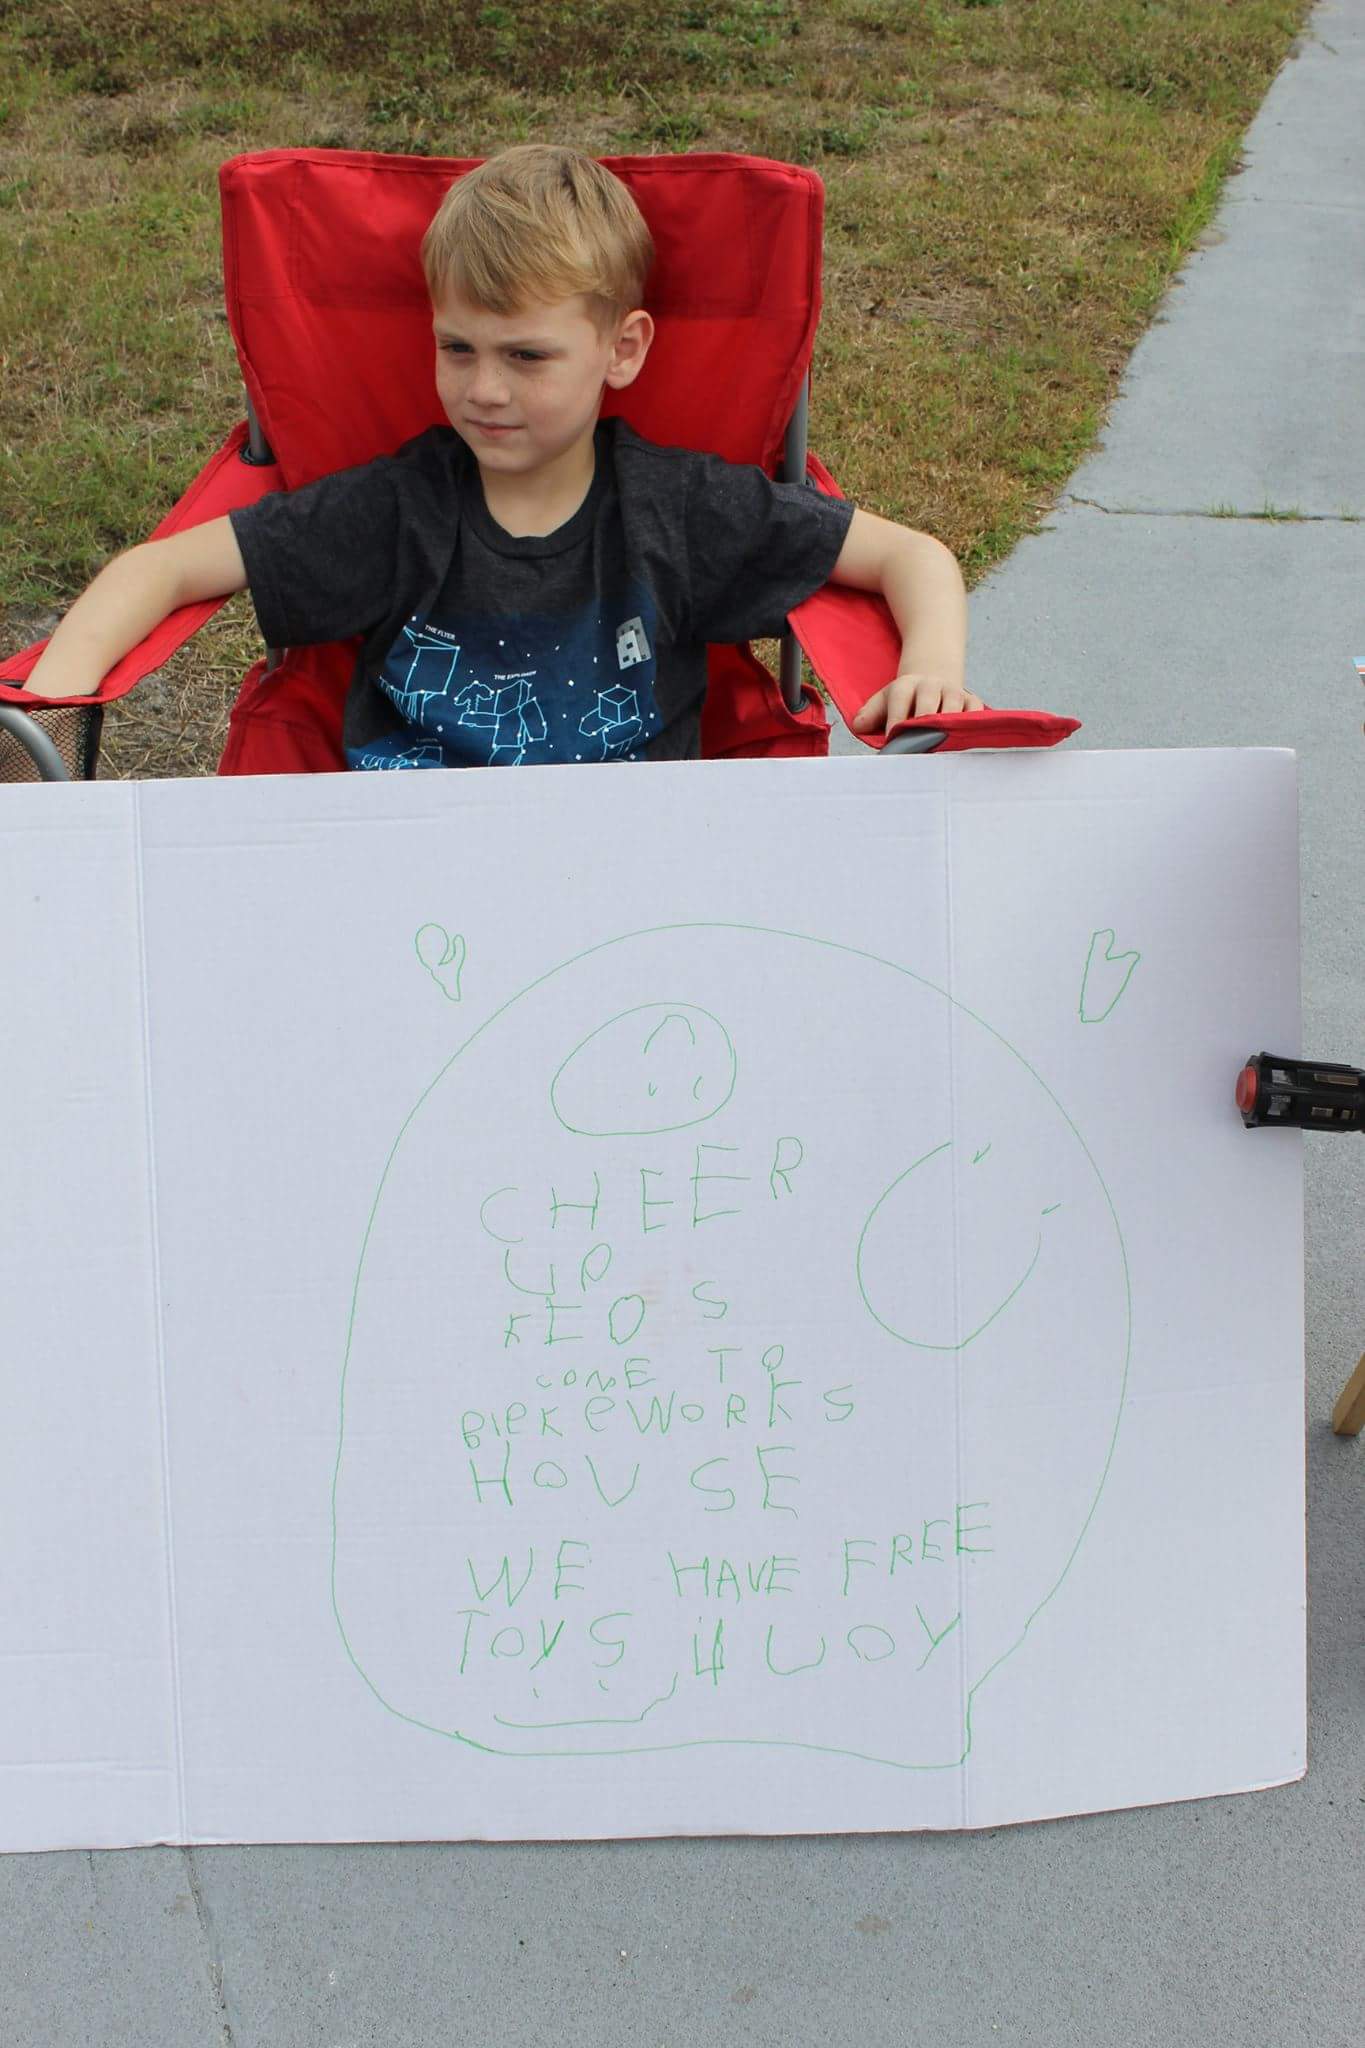 PHOTO: Little boy, Blake Work, paid it forward by holding a "free toy" stand for children who are less fortunate. 